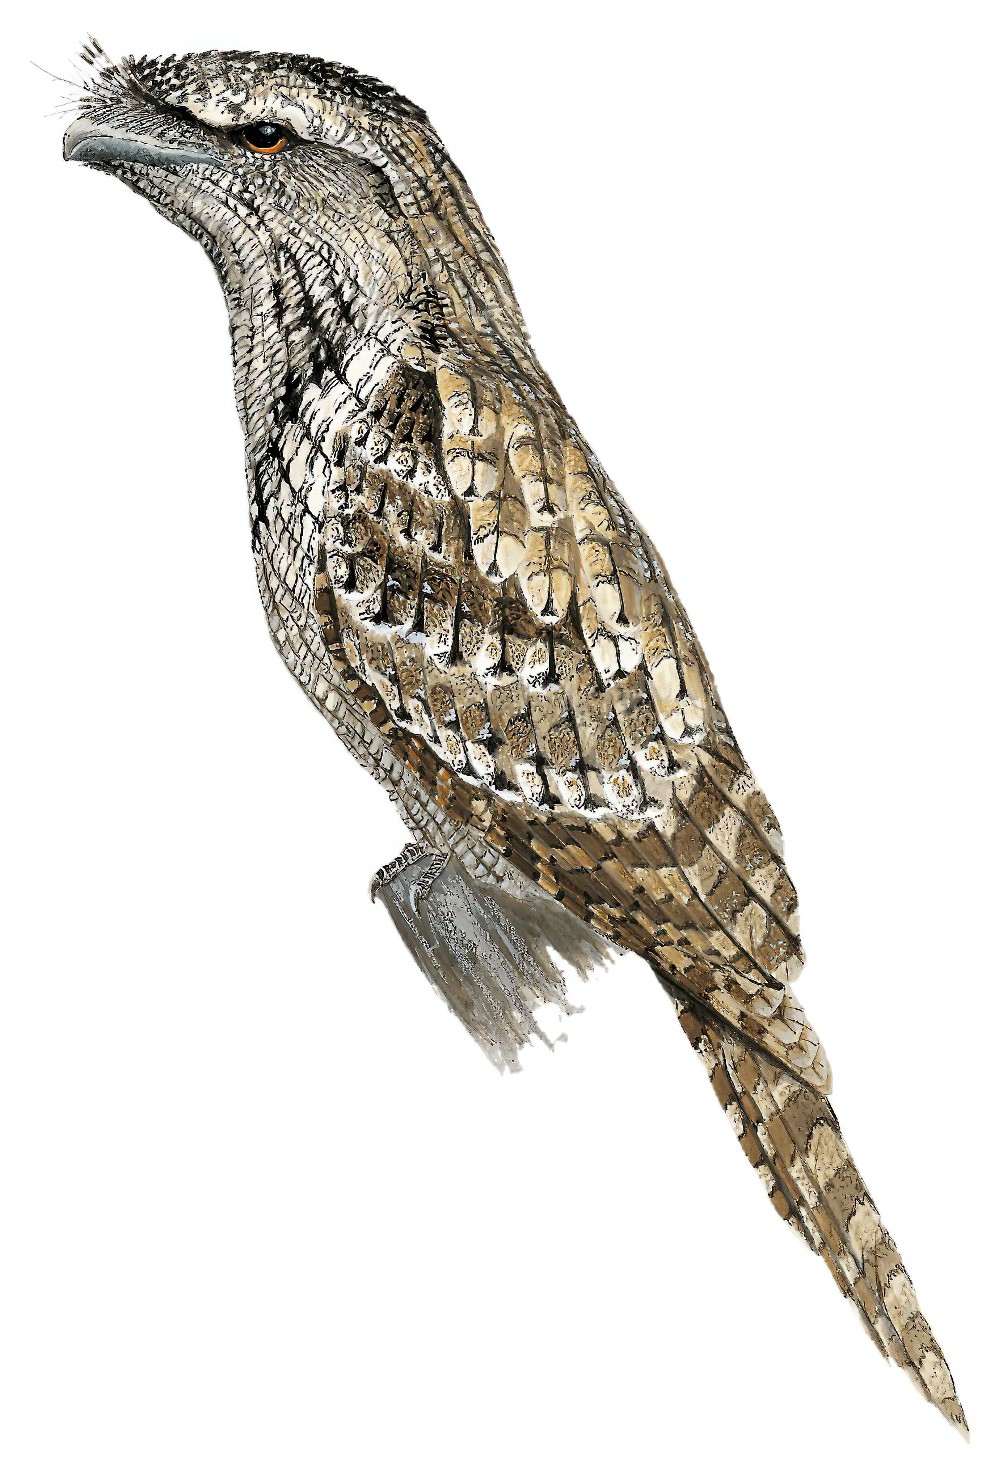 Marbled Frogmouth / Podargus ocellatus